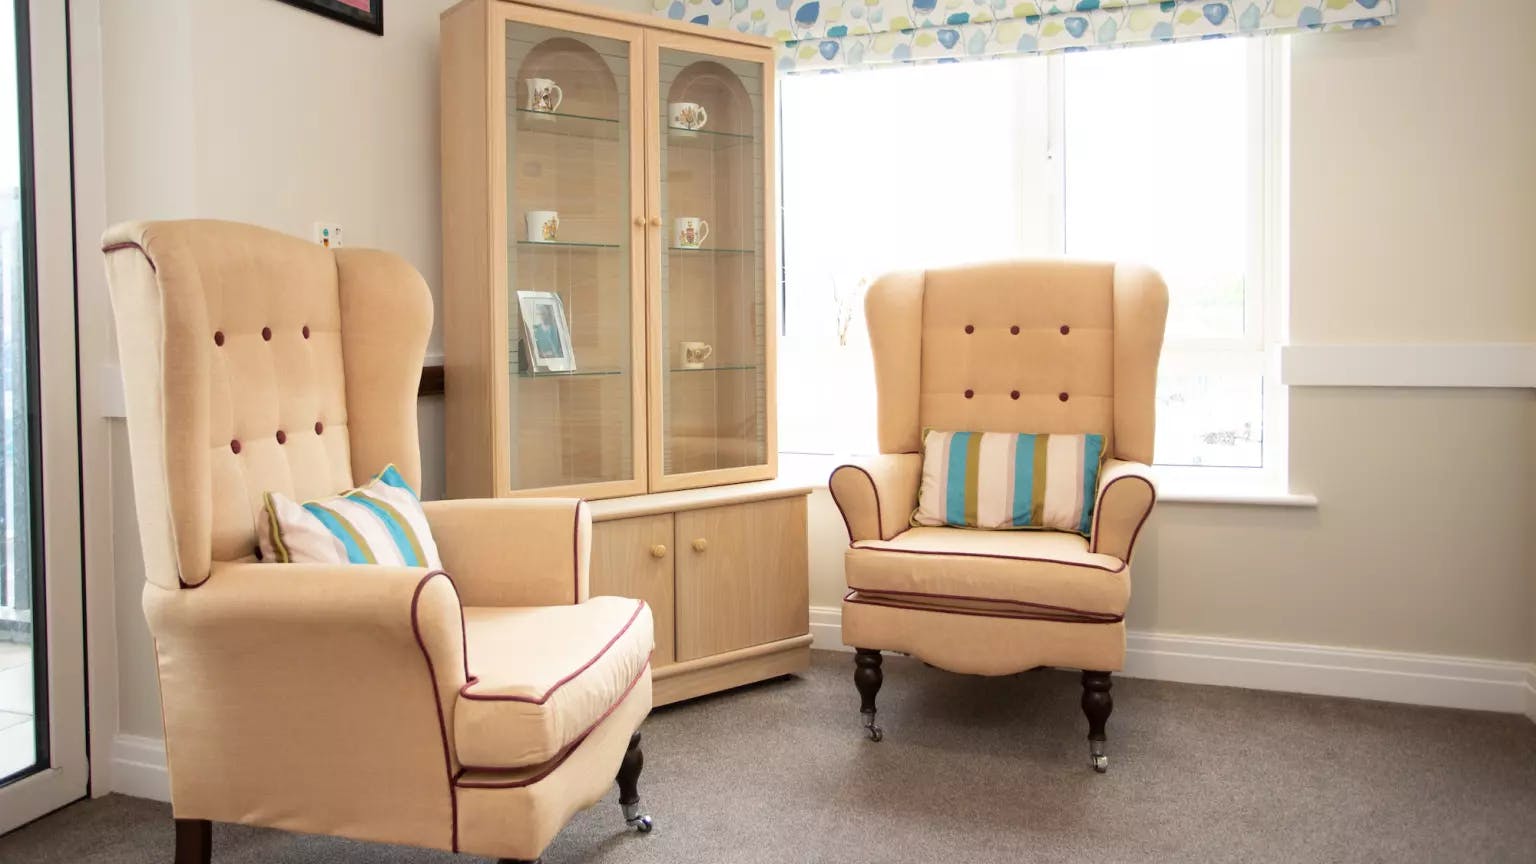 Lounge of Dukeminster Court care home in Dunstable, Bedfordshire